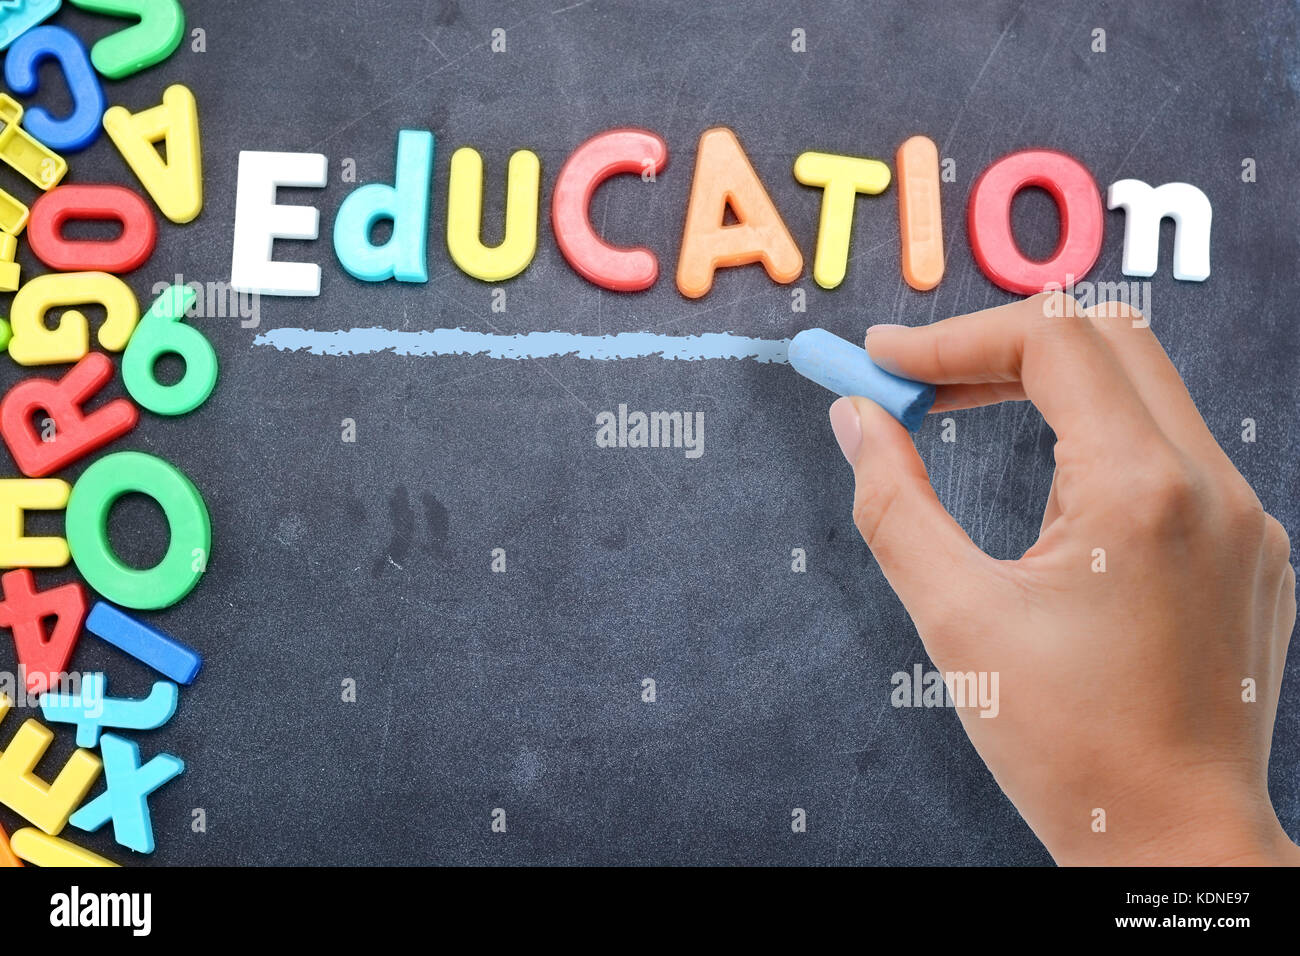 Education concept with colorful plastic letters on blackboard Stock Photo